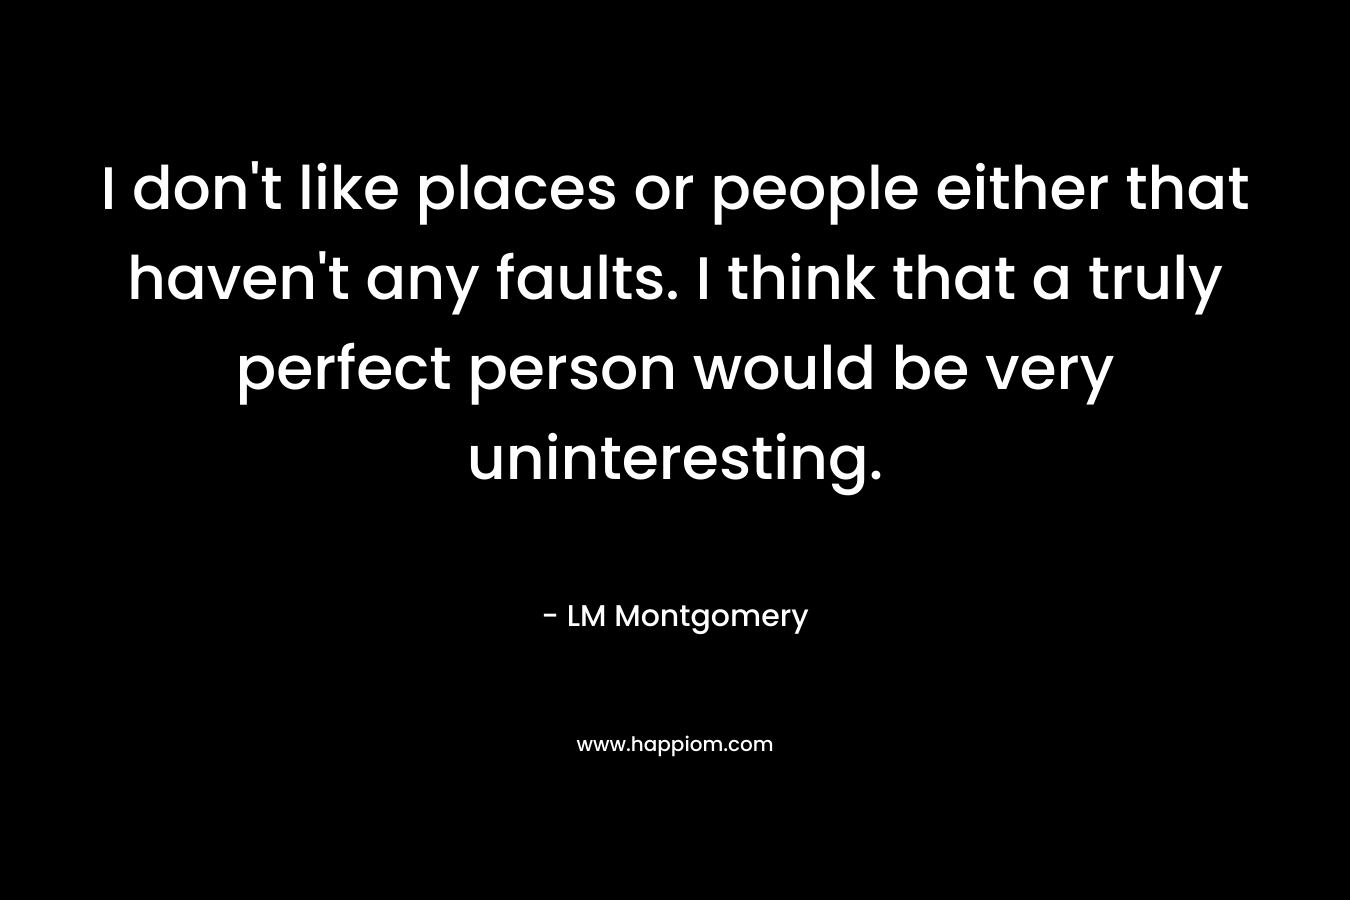 I don’t like places or people either that haven’t any faults. I think that a truly perfect person would be very uninteresting. – LM Montgomery